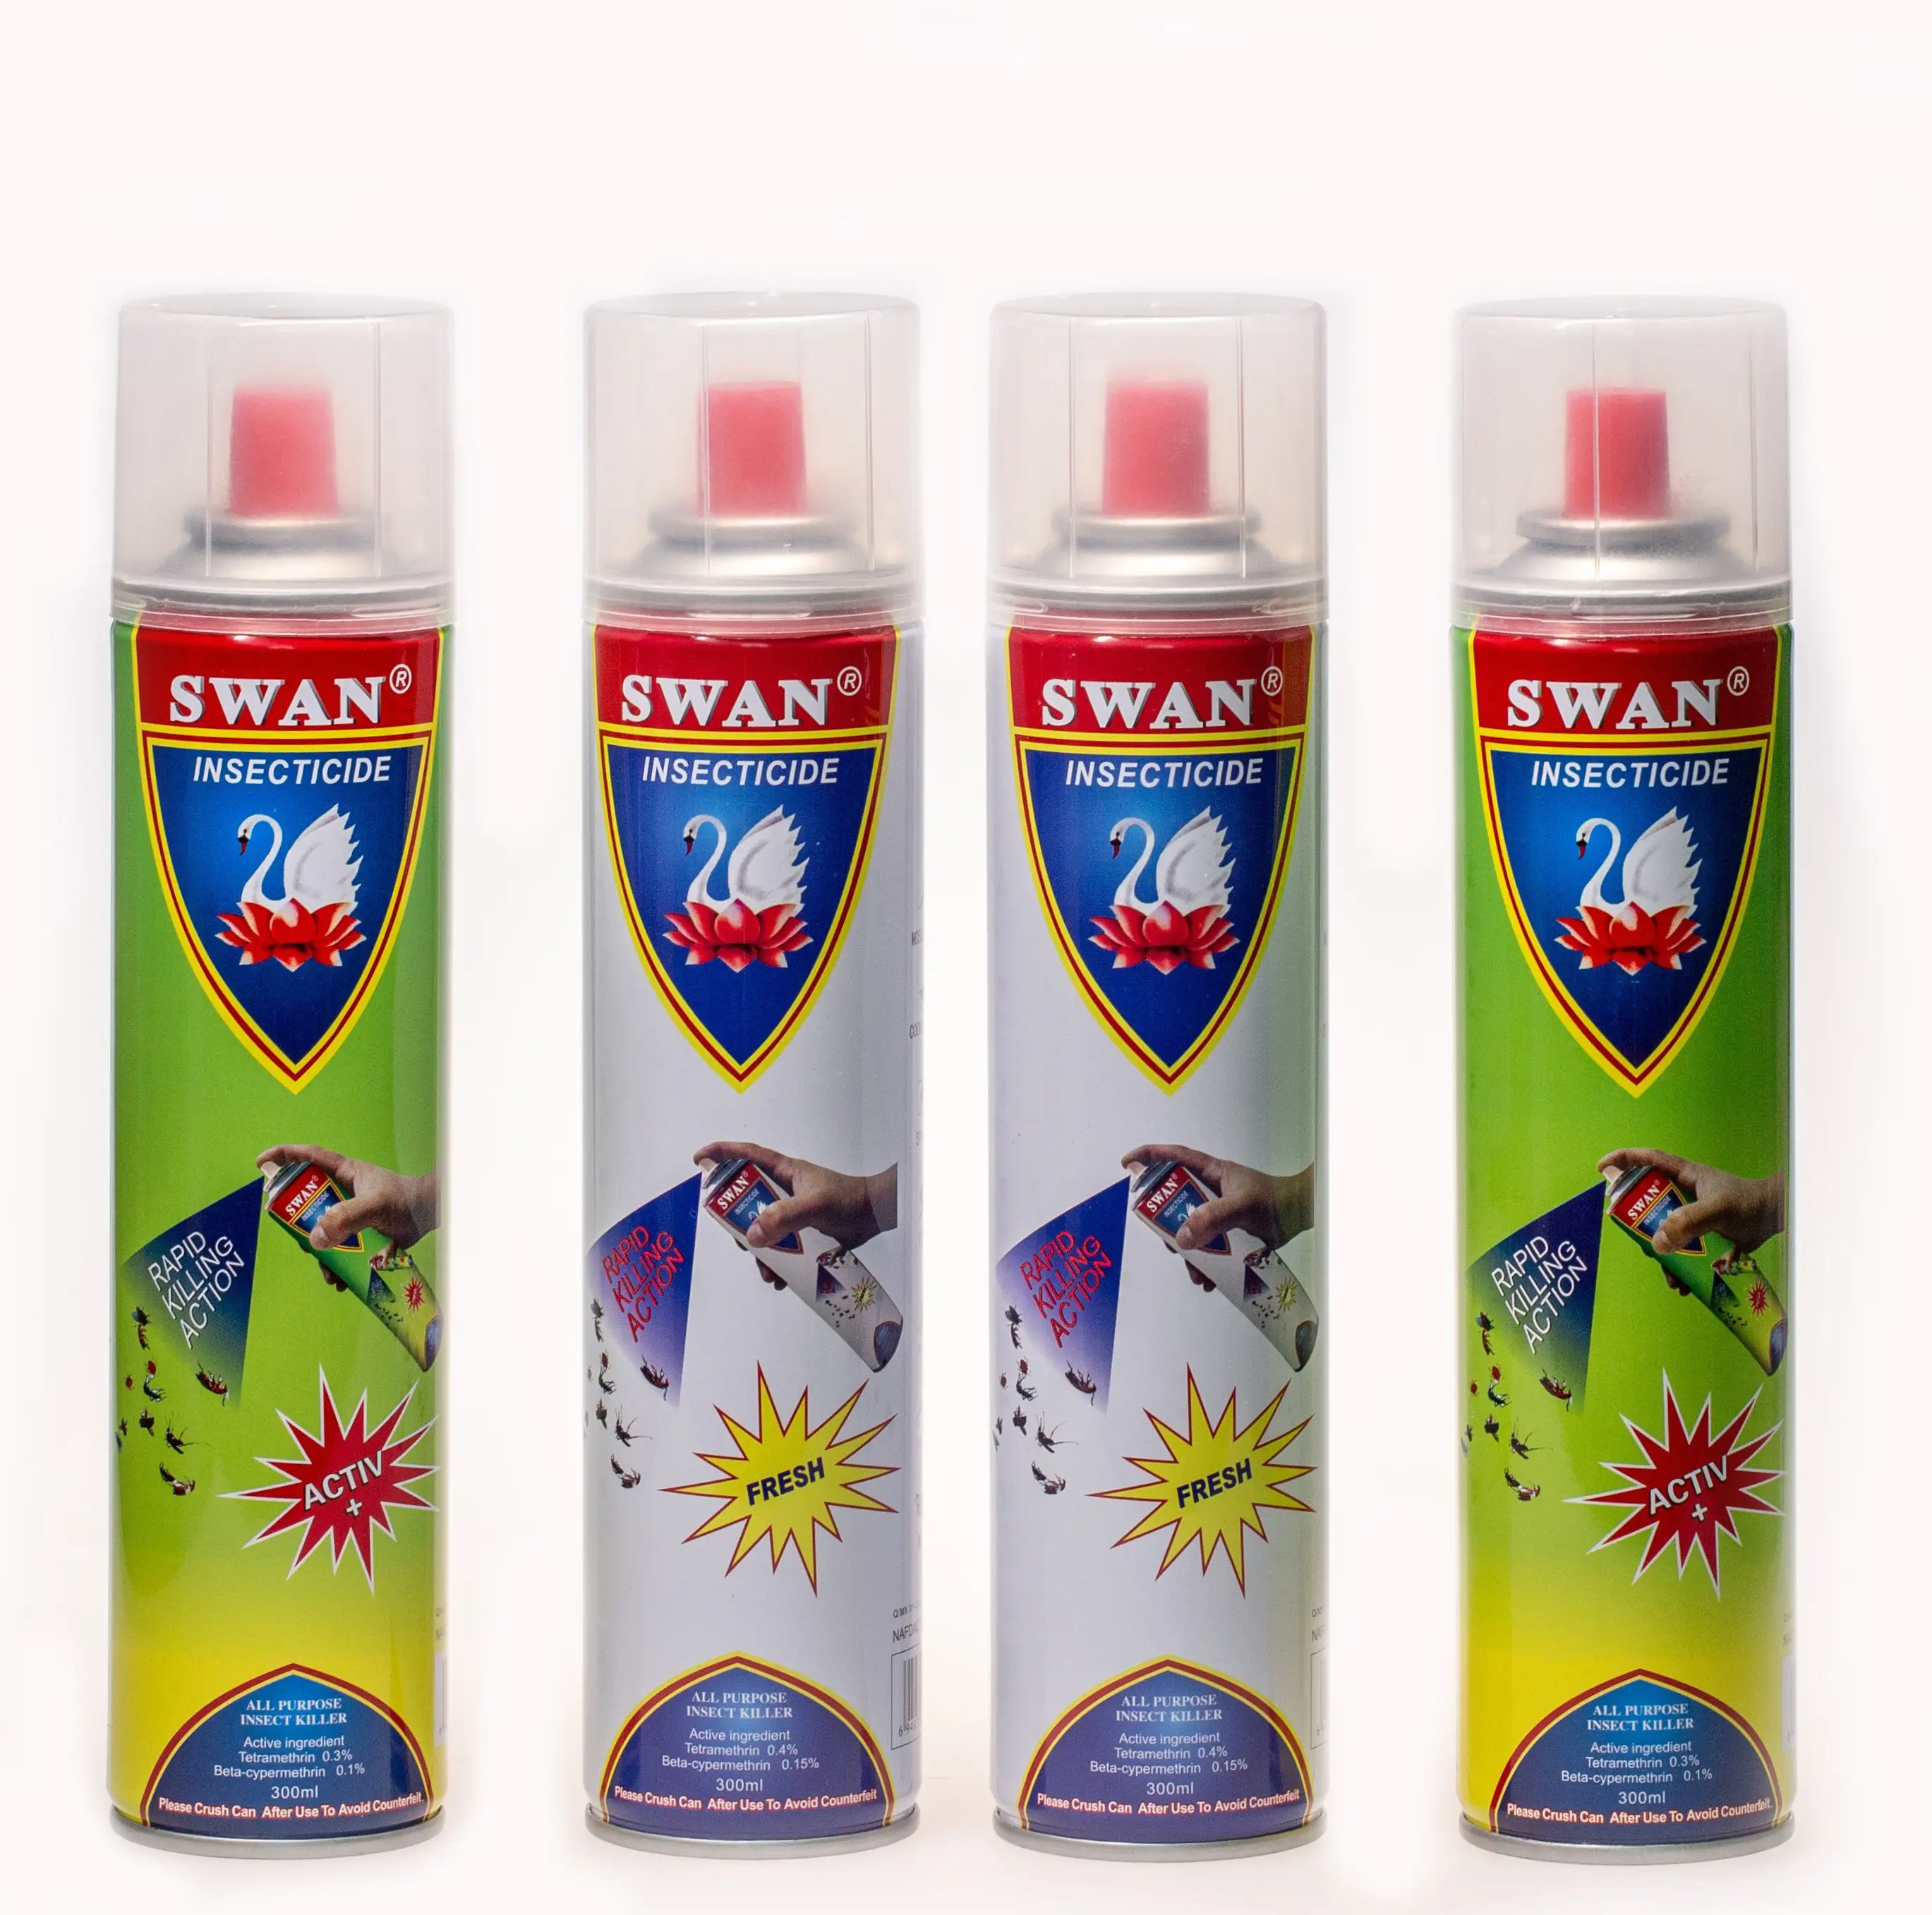 Brand Swan Lasting Effective Oil Based Household Insecticide Spray For Mosquito Bedbug Roach Killing